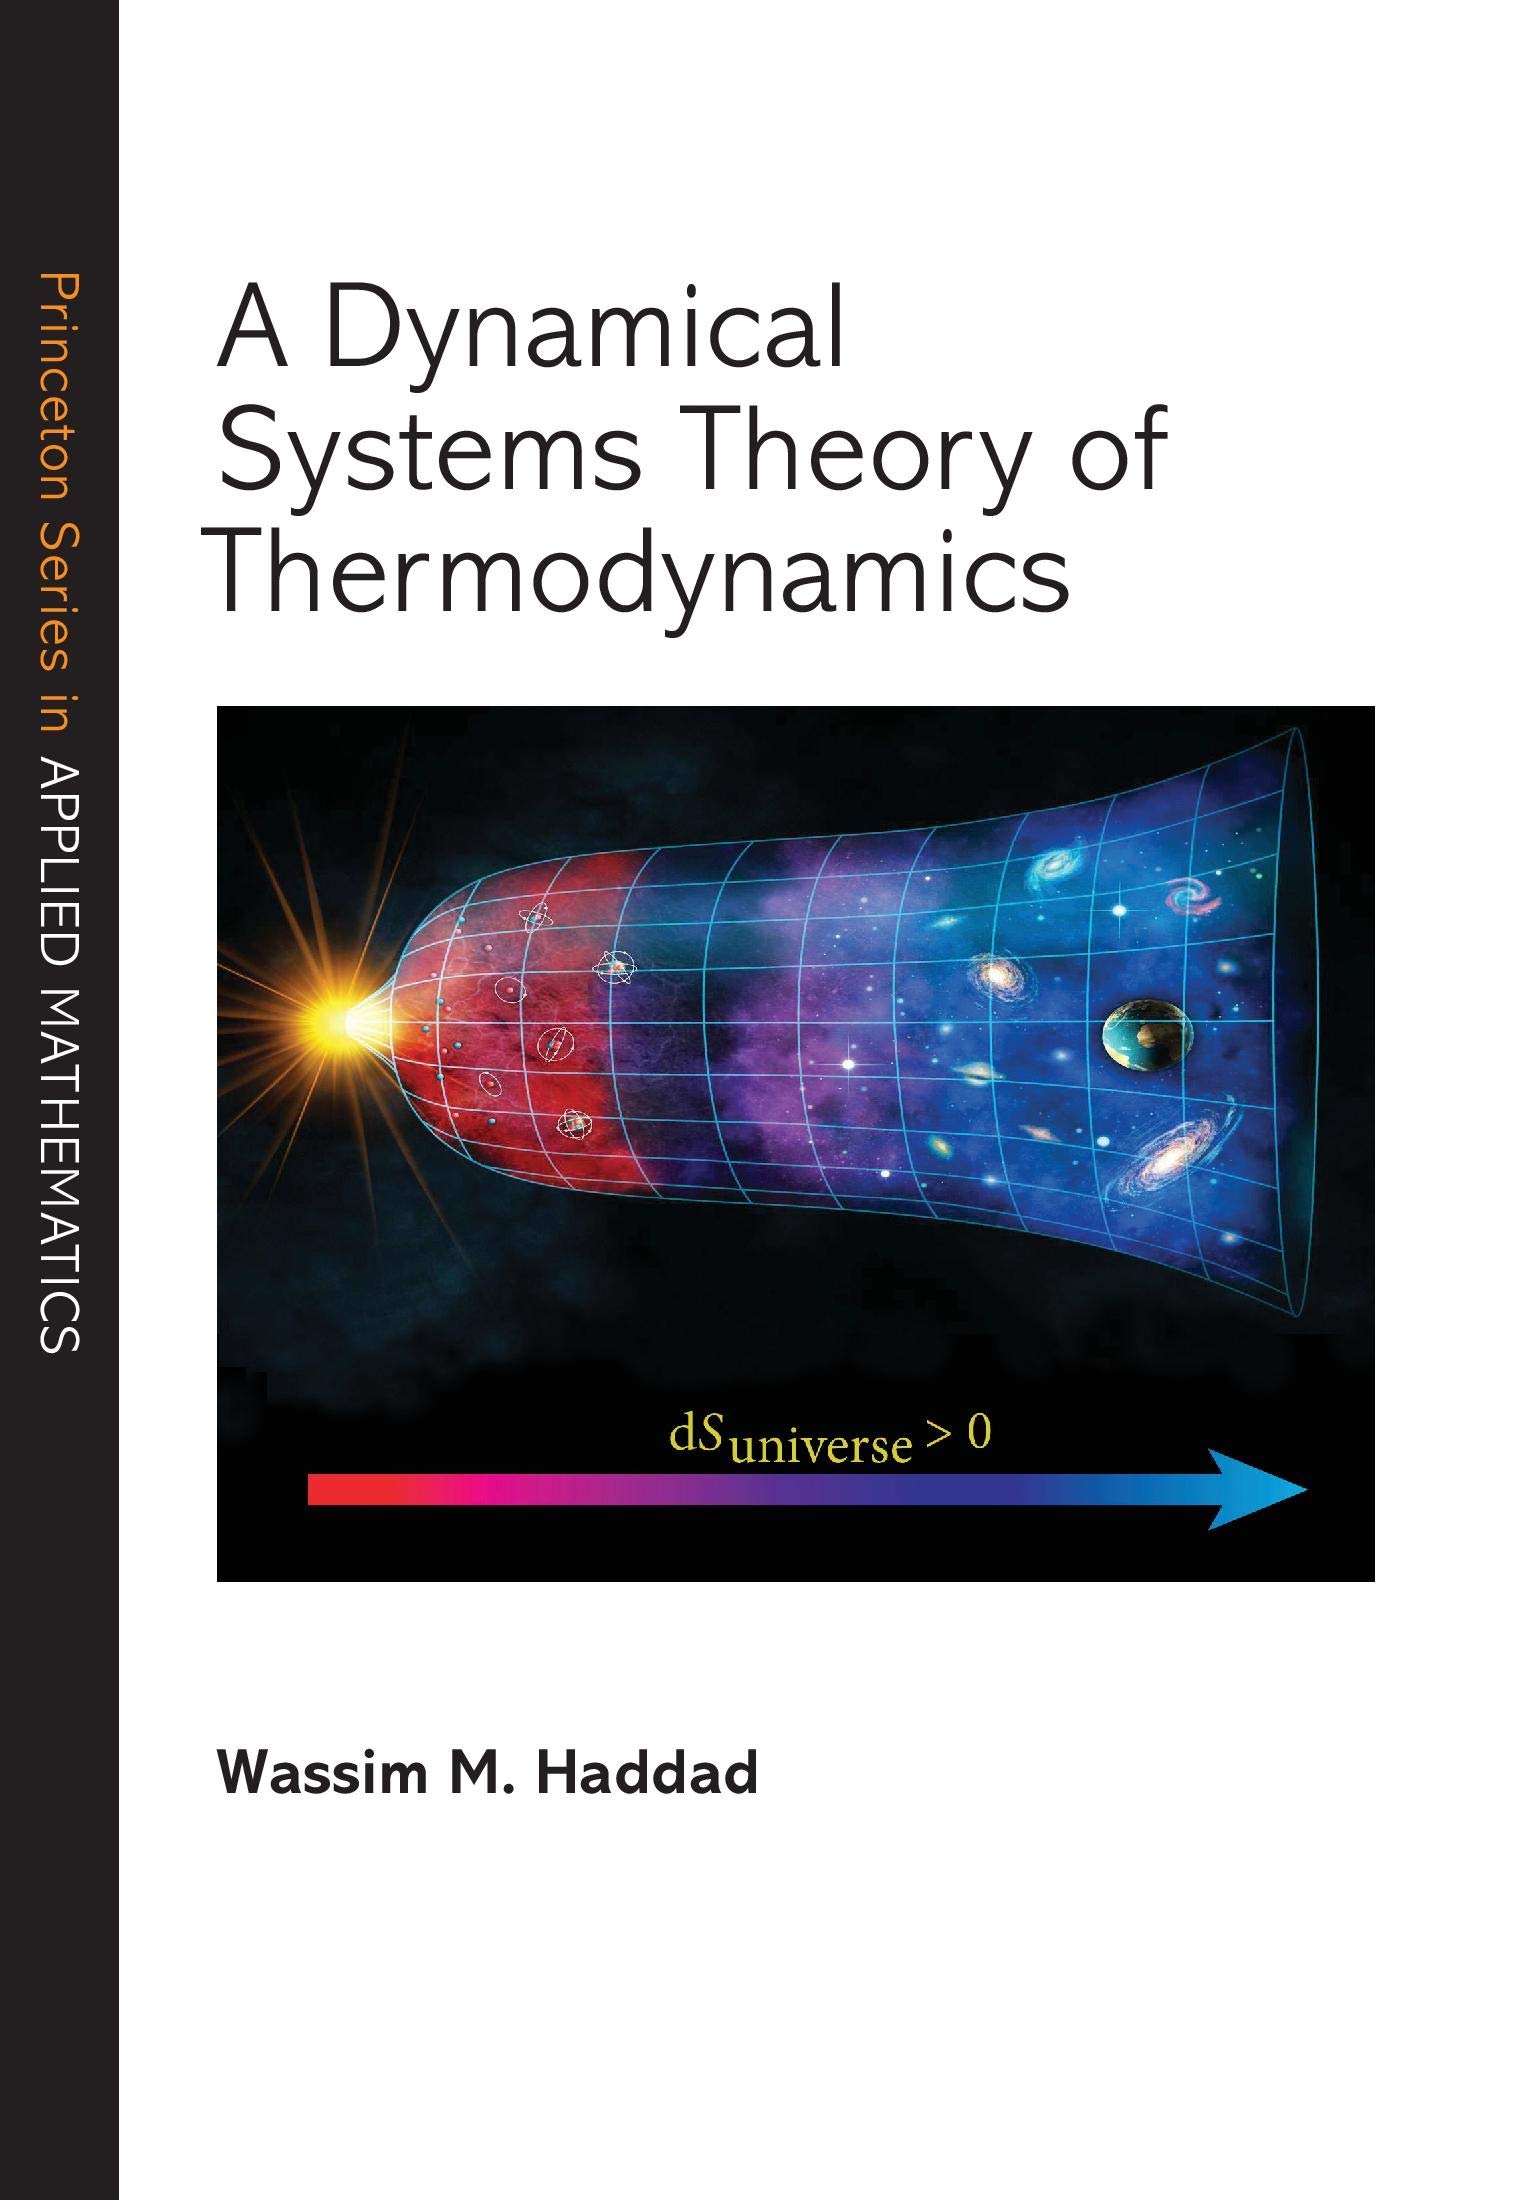 A Dynamical Systems Theory of Thermodynamics (Princeton Series in Applied Mathematics, 1)